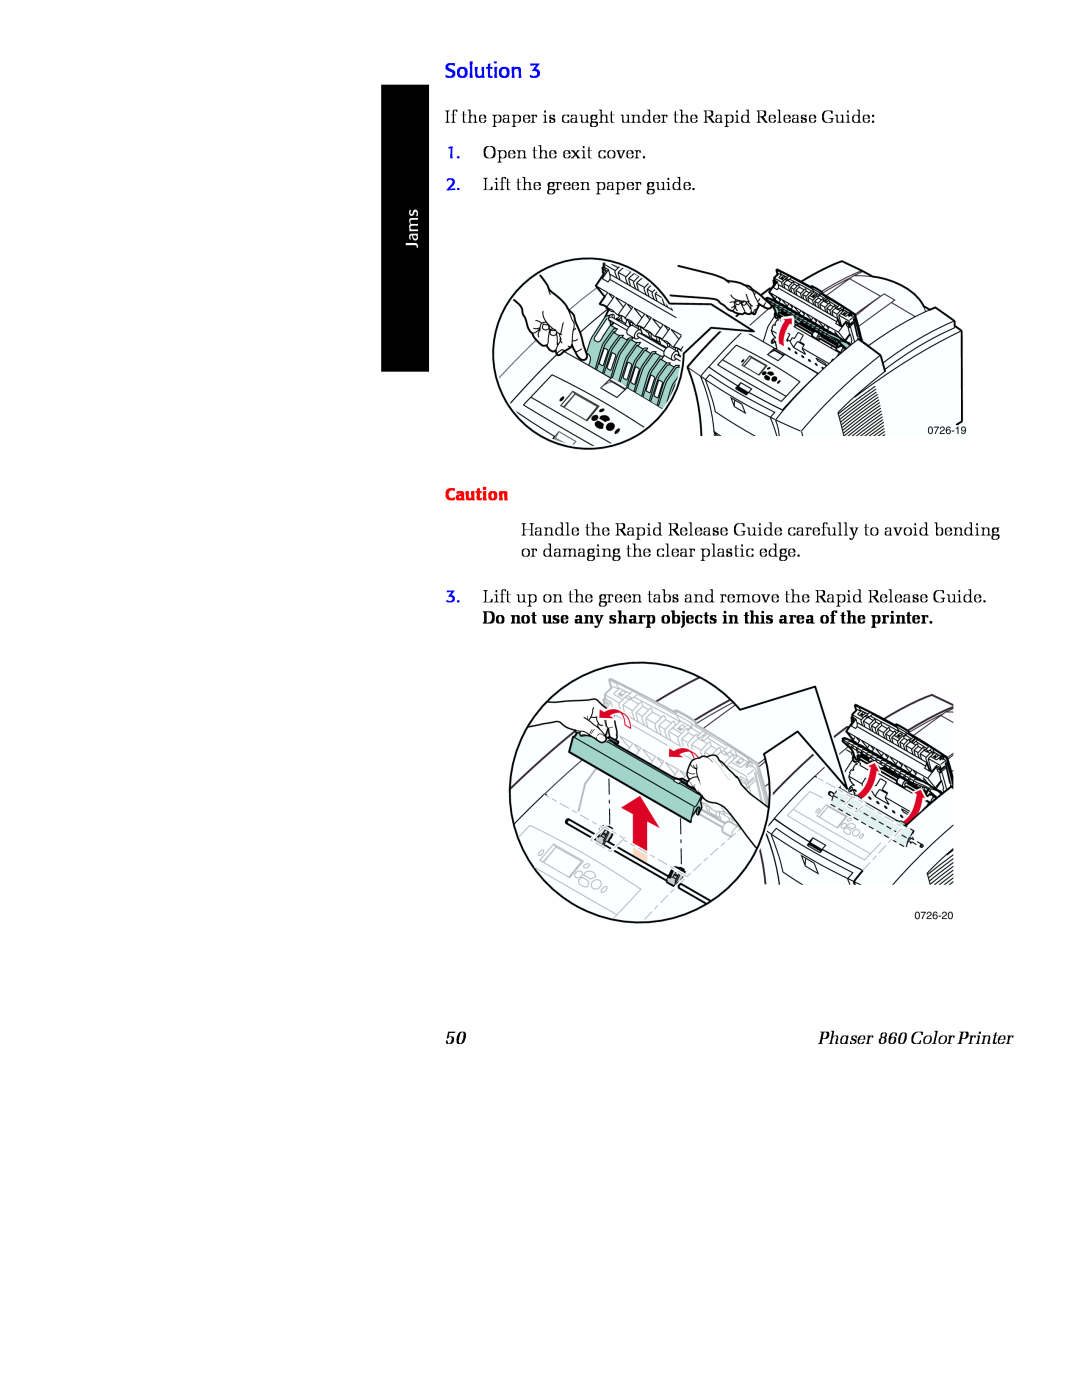 Xerox manual Jams, Do not use any sharp objects in this area of the printer, Phaser 860 Color Printer, 0726-19, 0726-20 